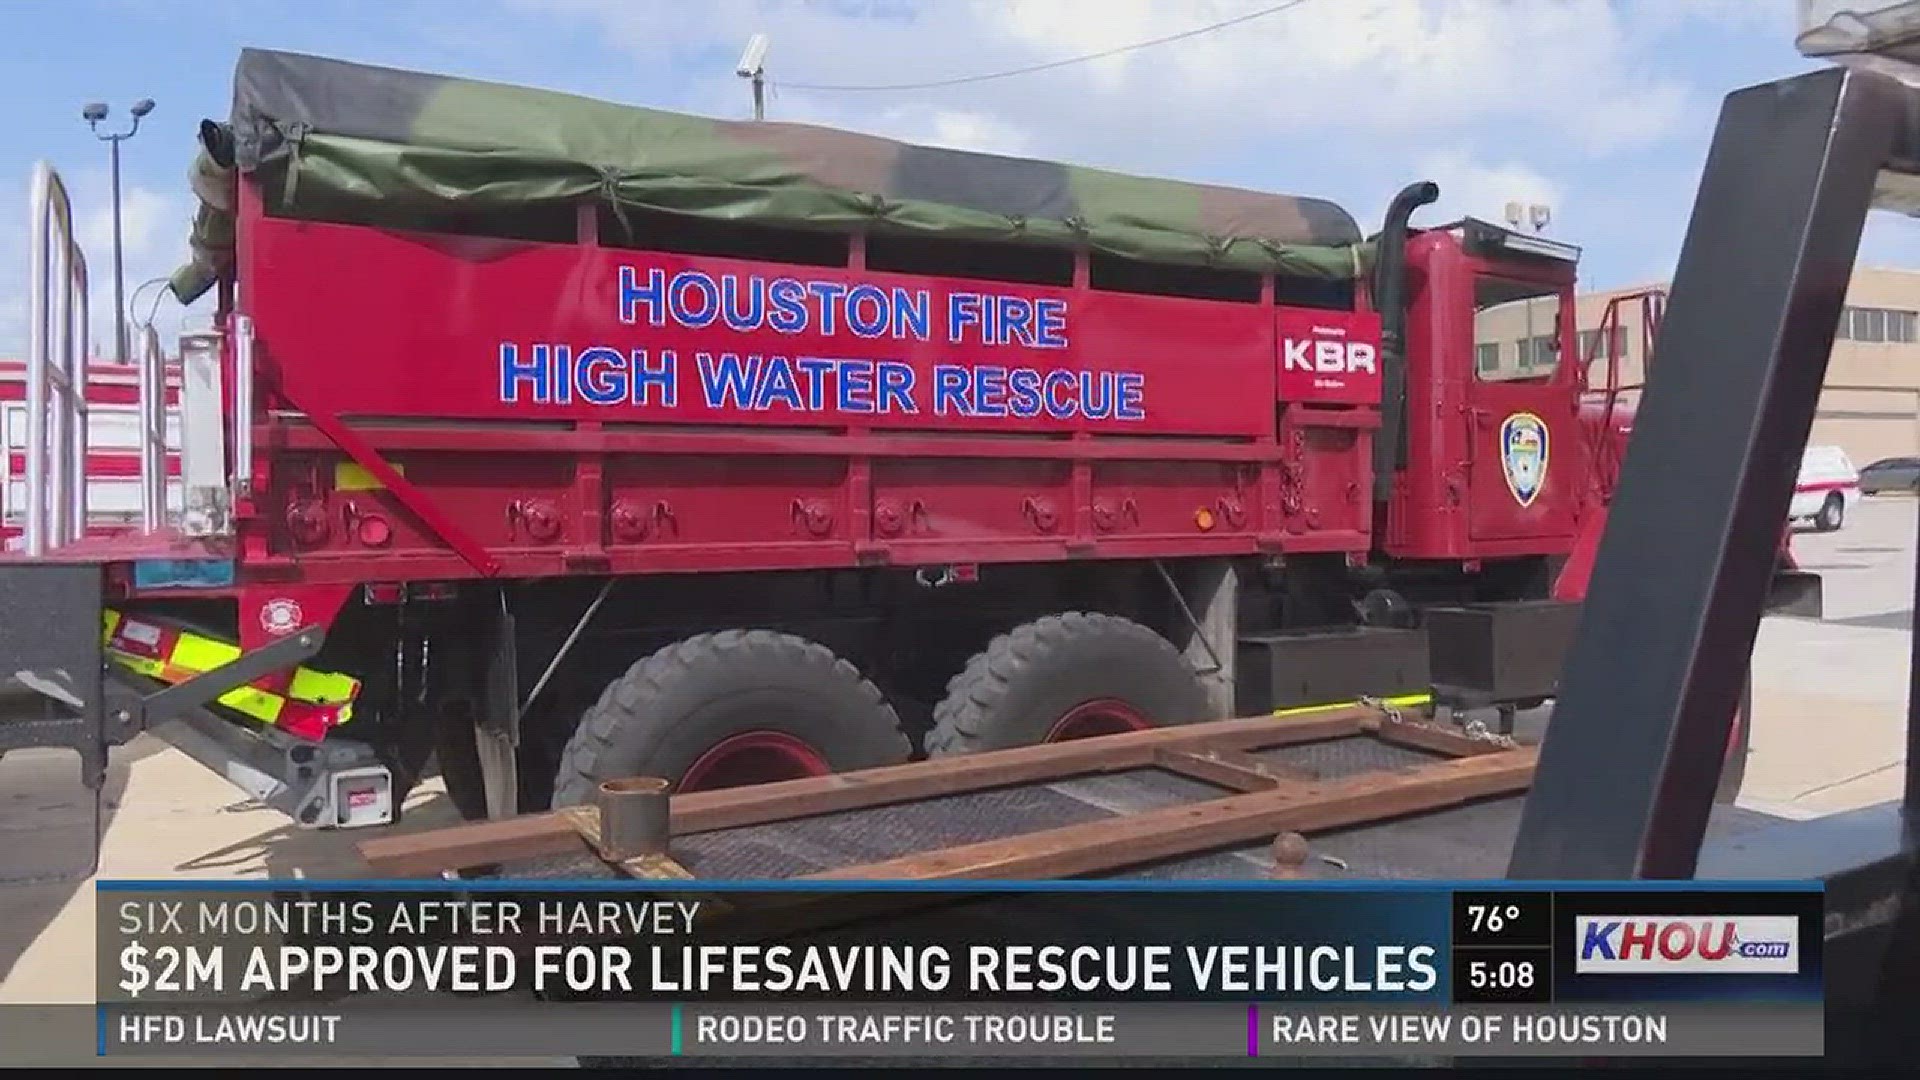 Six months after Harvey, Houston city councilmembers approved money for lifesaving rescue vehicles.